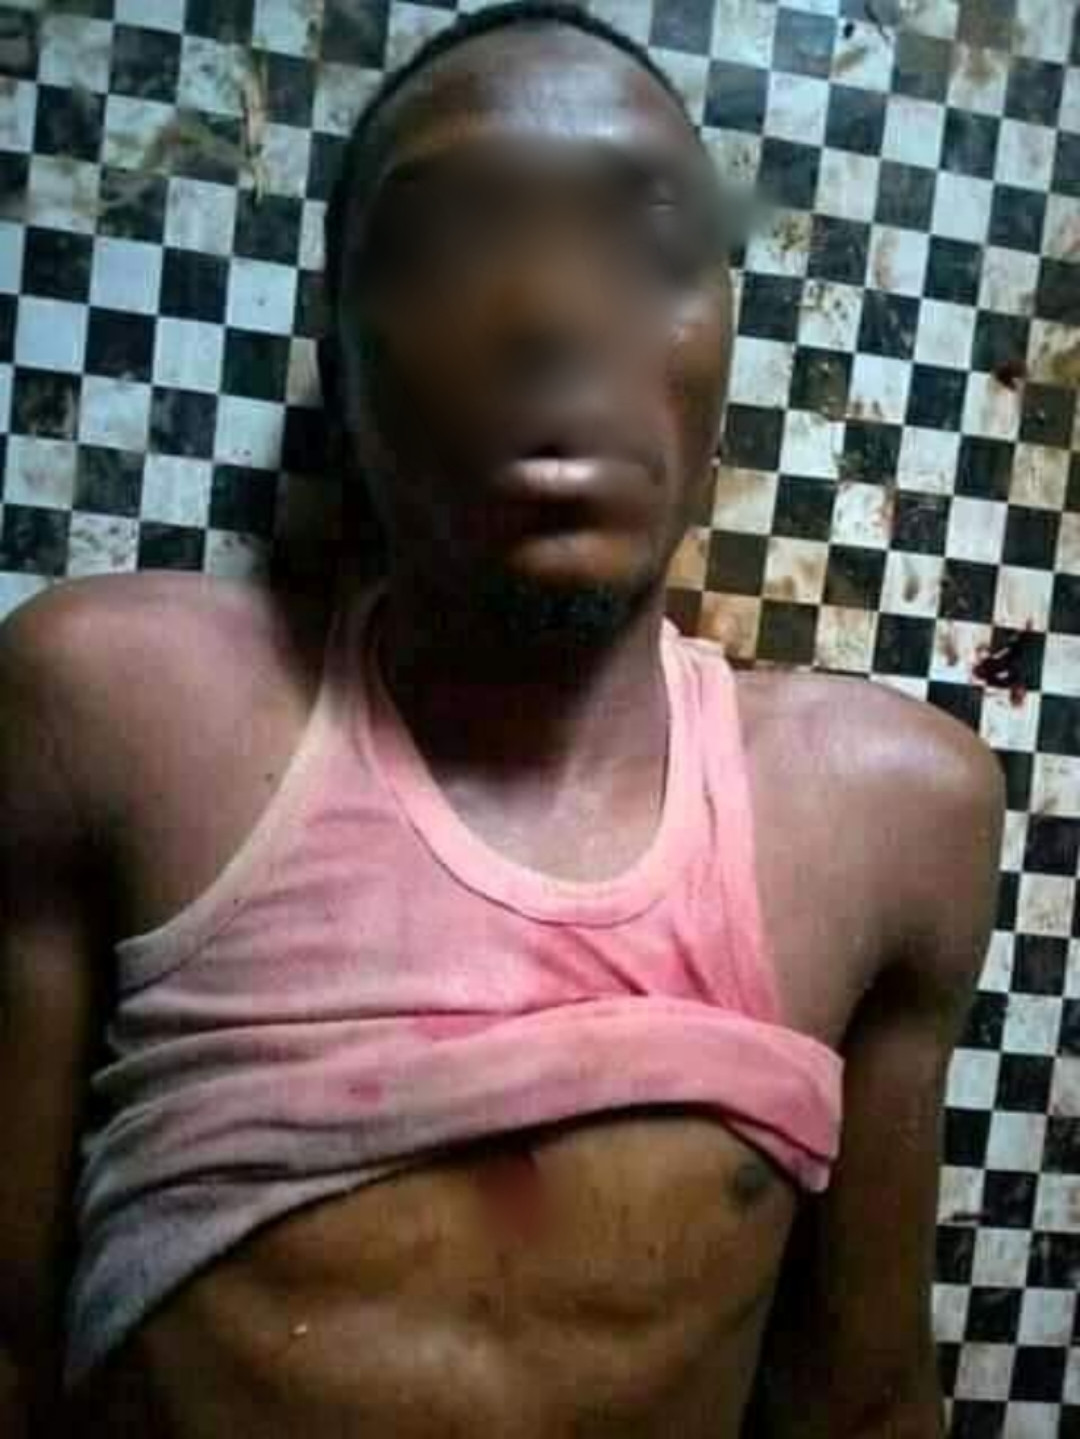 Young housewife stabs her husband to death in Bauchi (graphic photos)